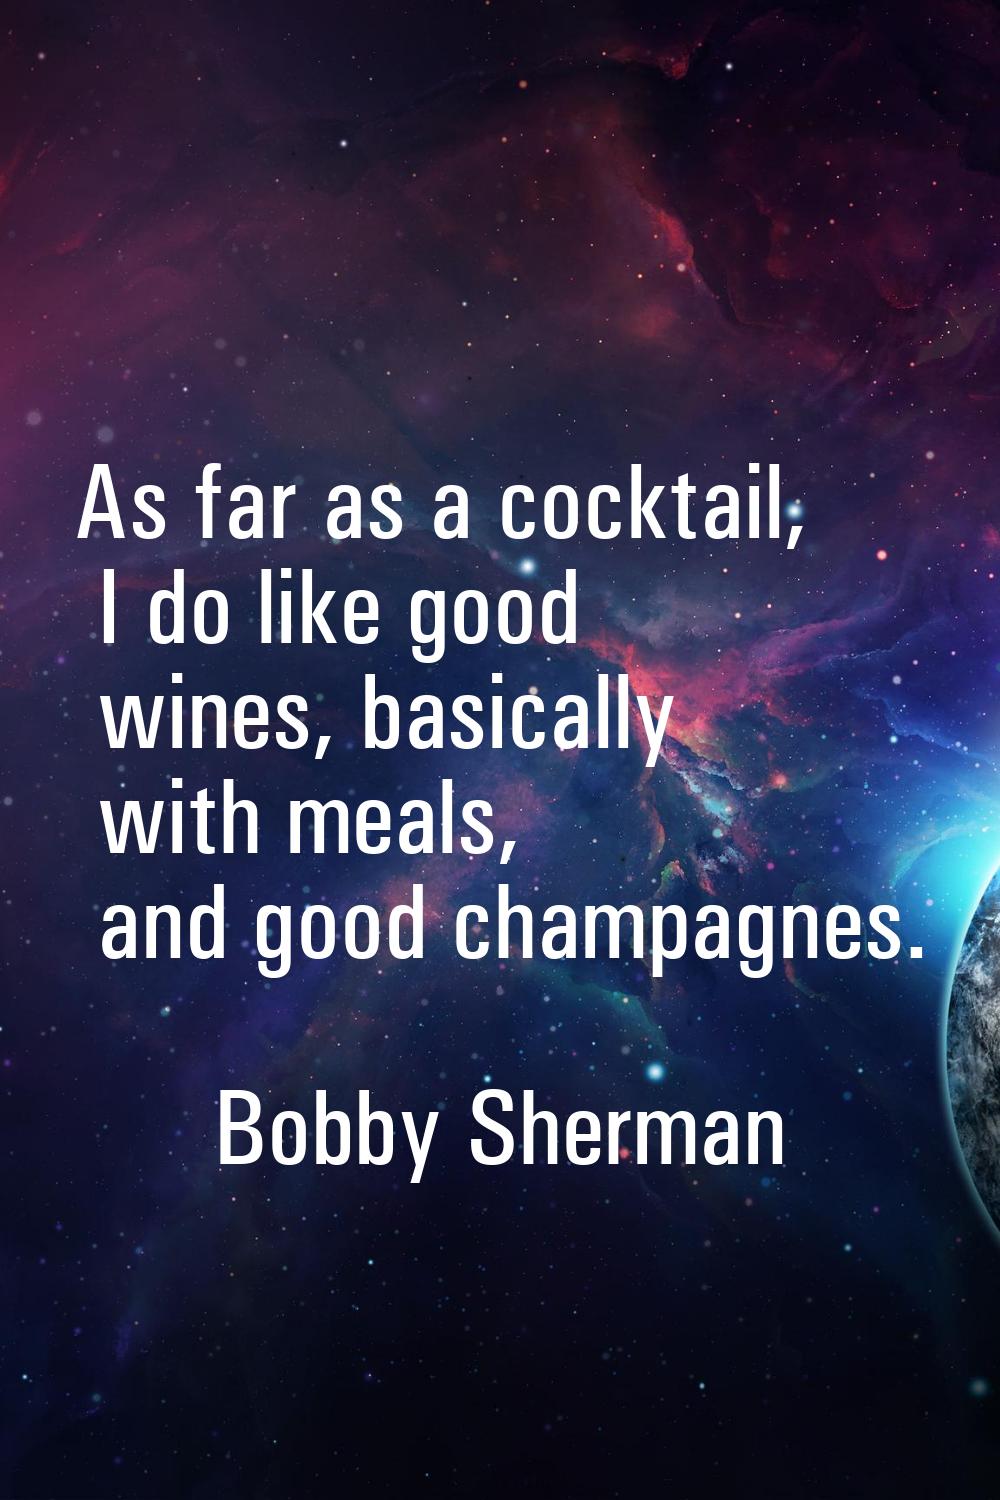 As far as a cocktail, I do like good wines, basically with meals, and good champagnes.